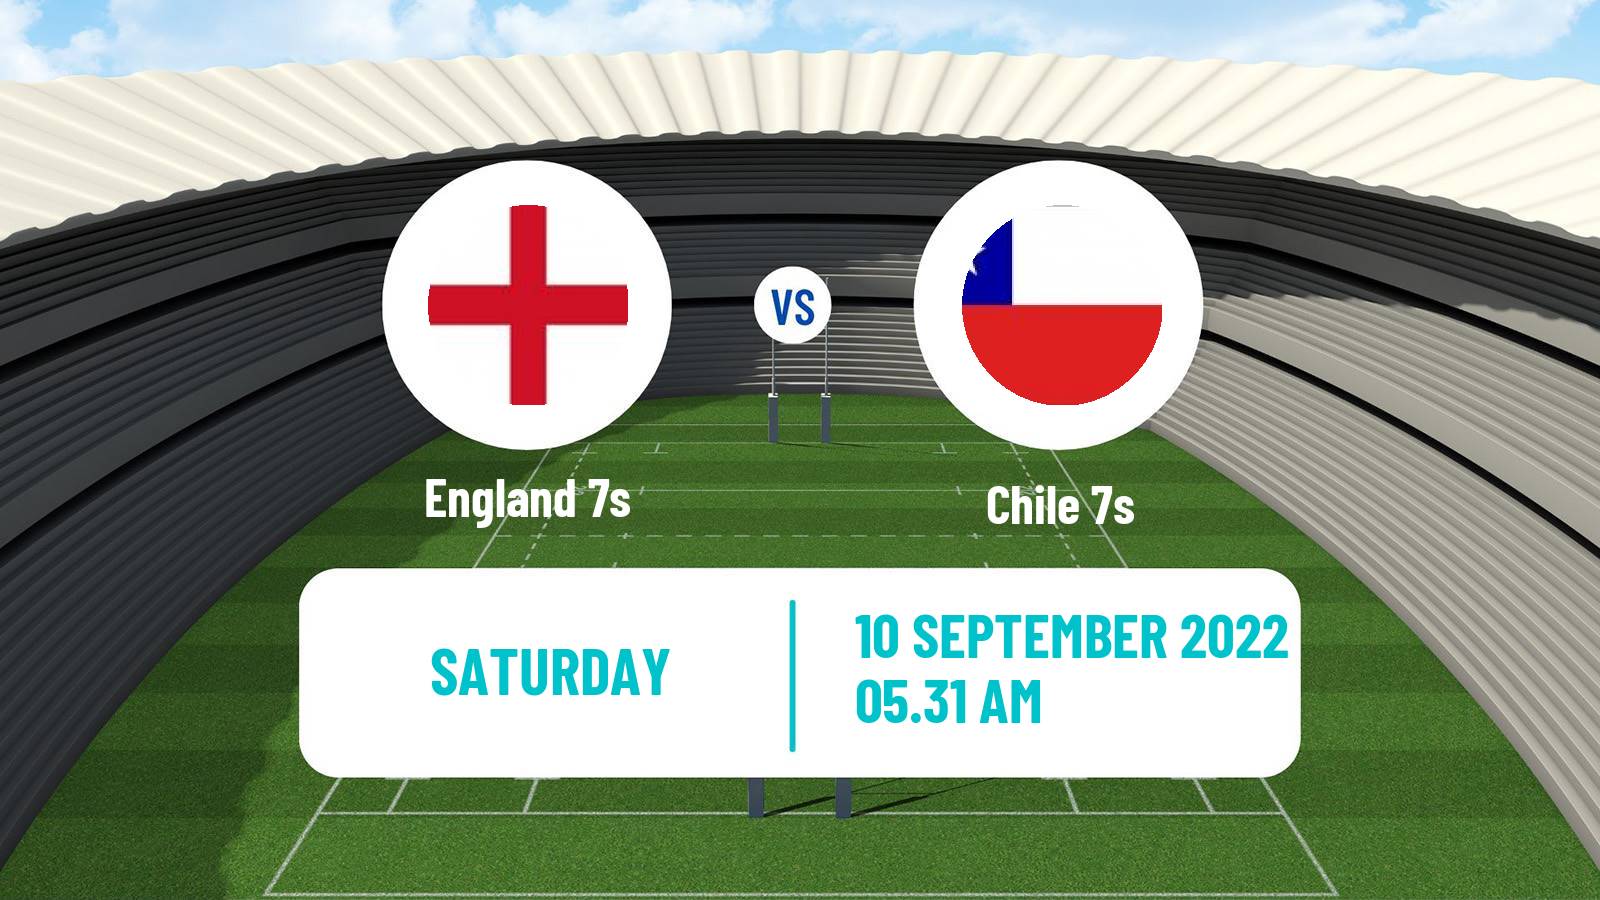 Rugby union Sevens World Cup England 7s - Chile 7s